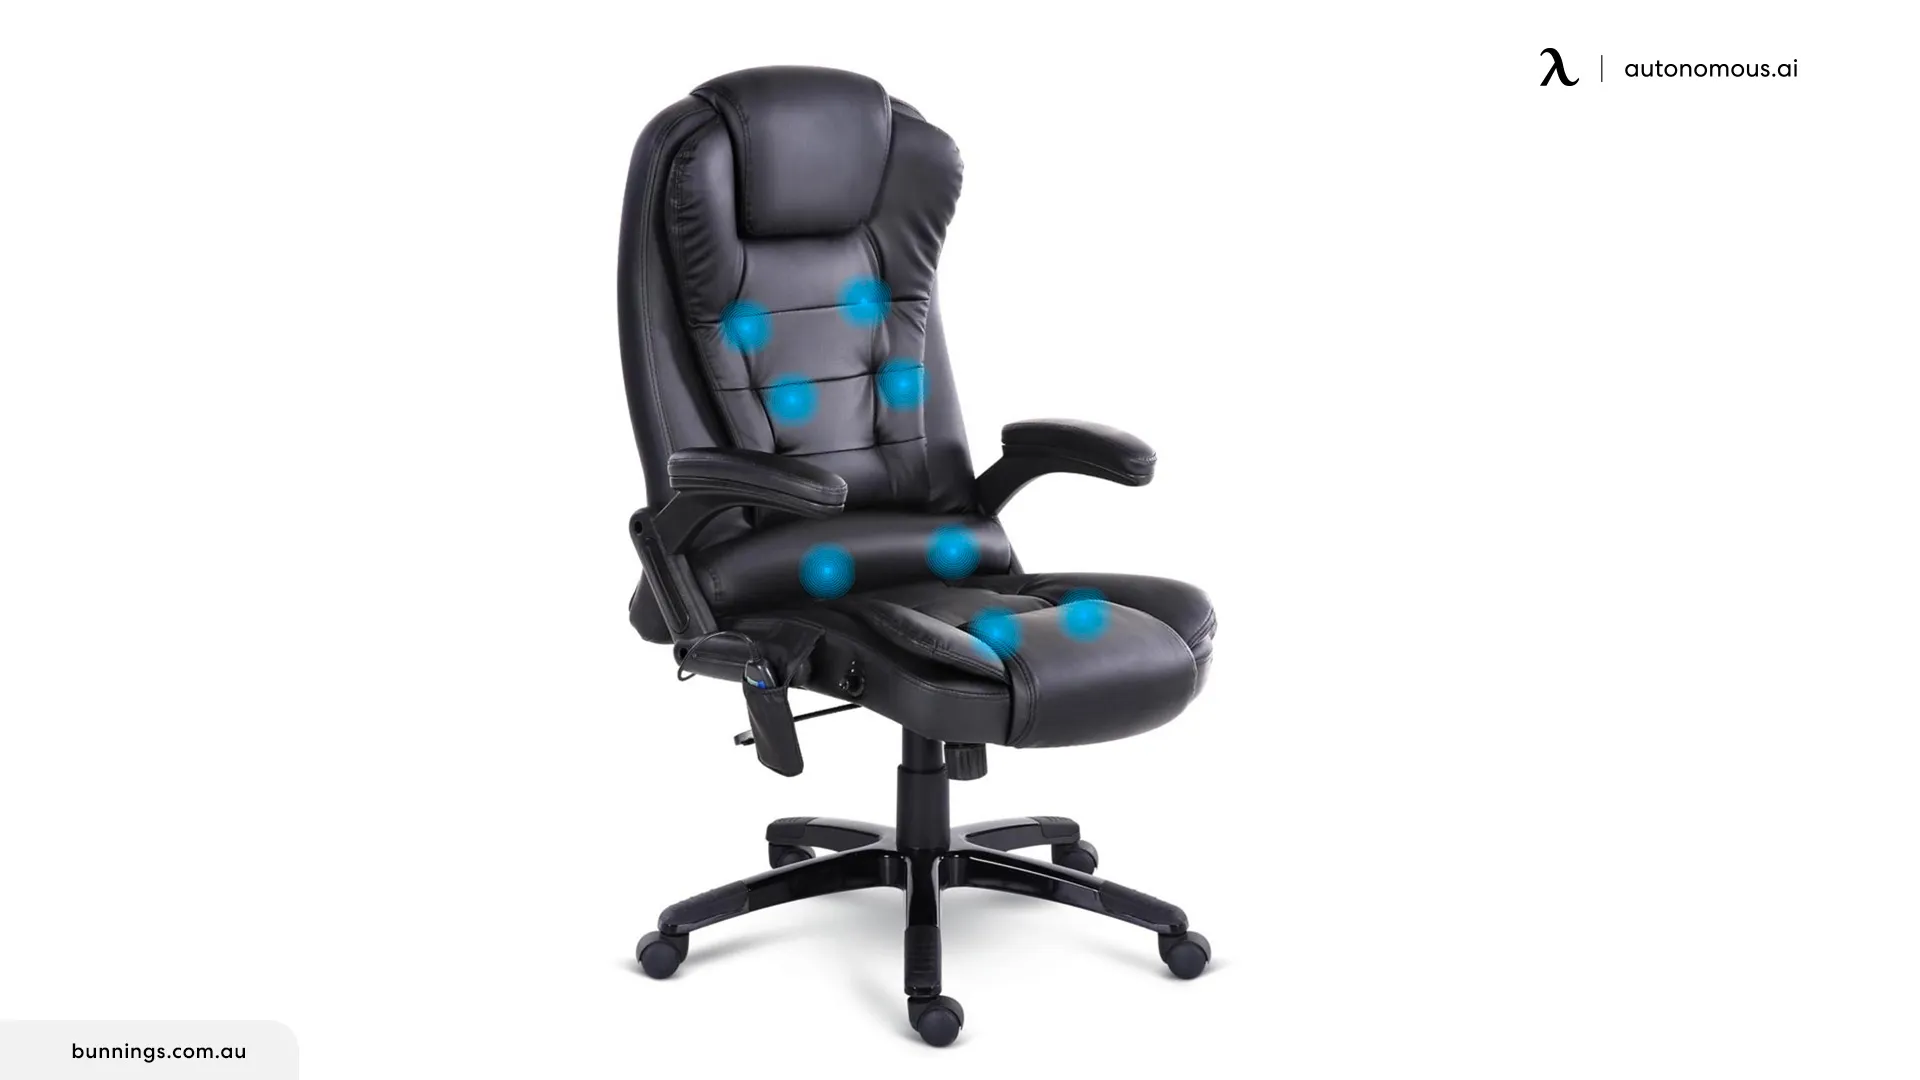 Differences Between a Heat Chair and a Traditional Chair